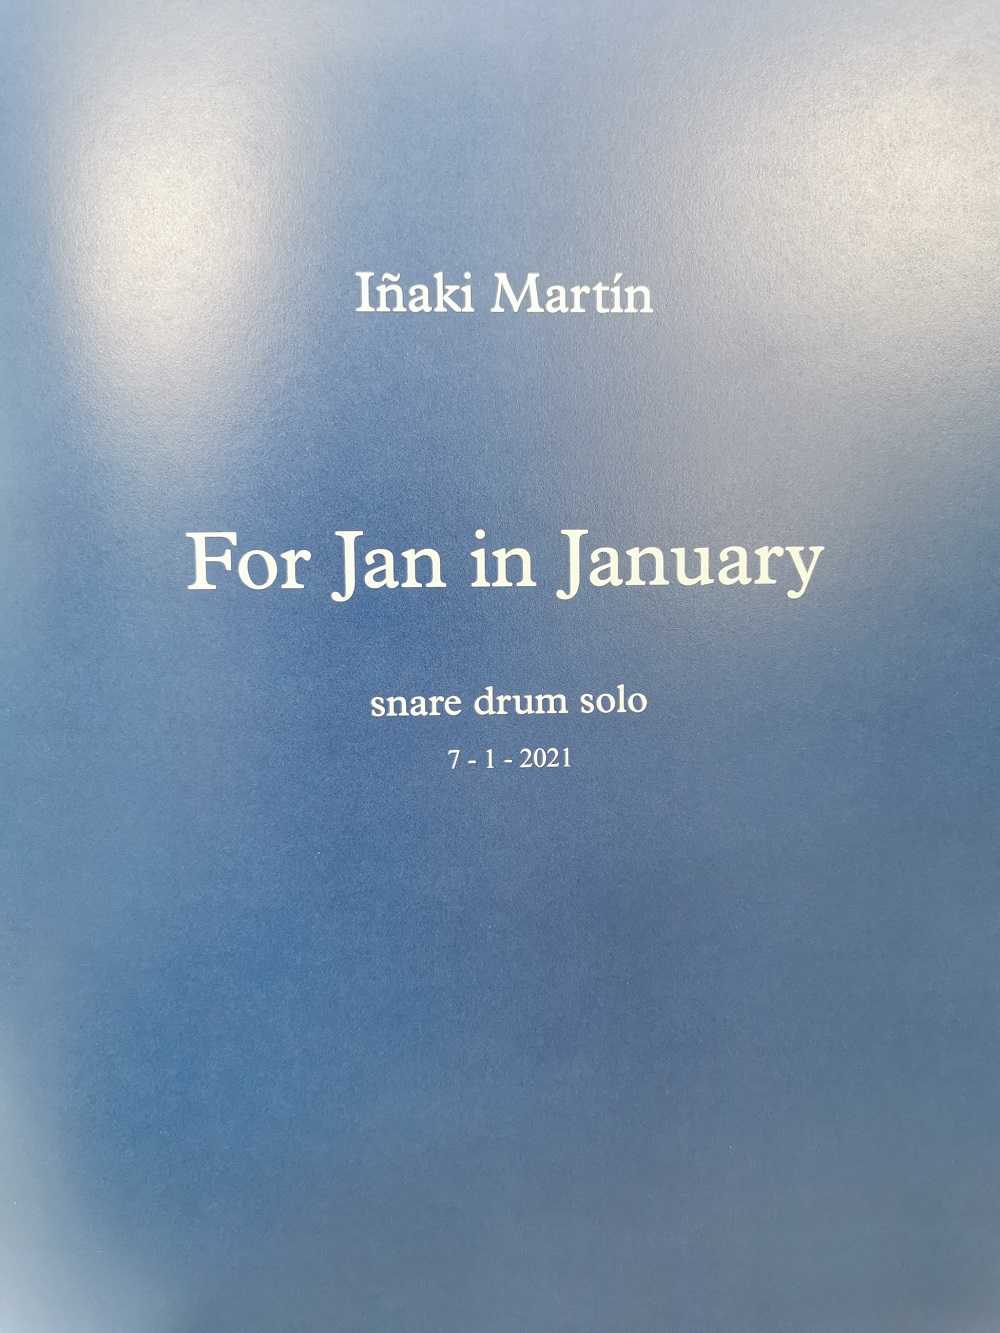 For Jan in January by Inaki Martin